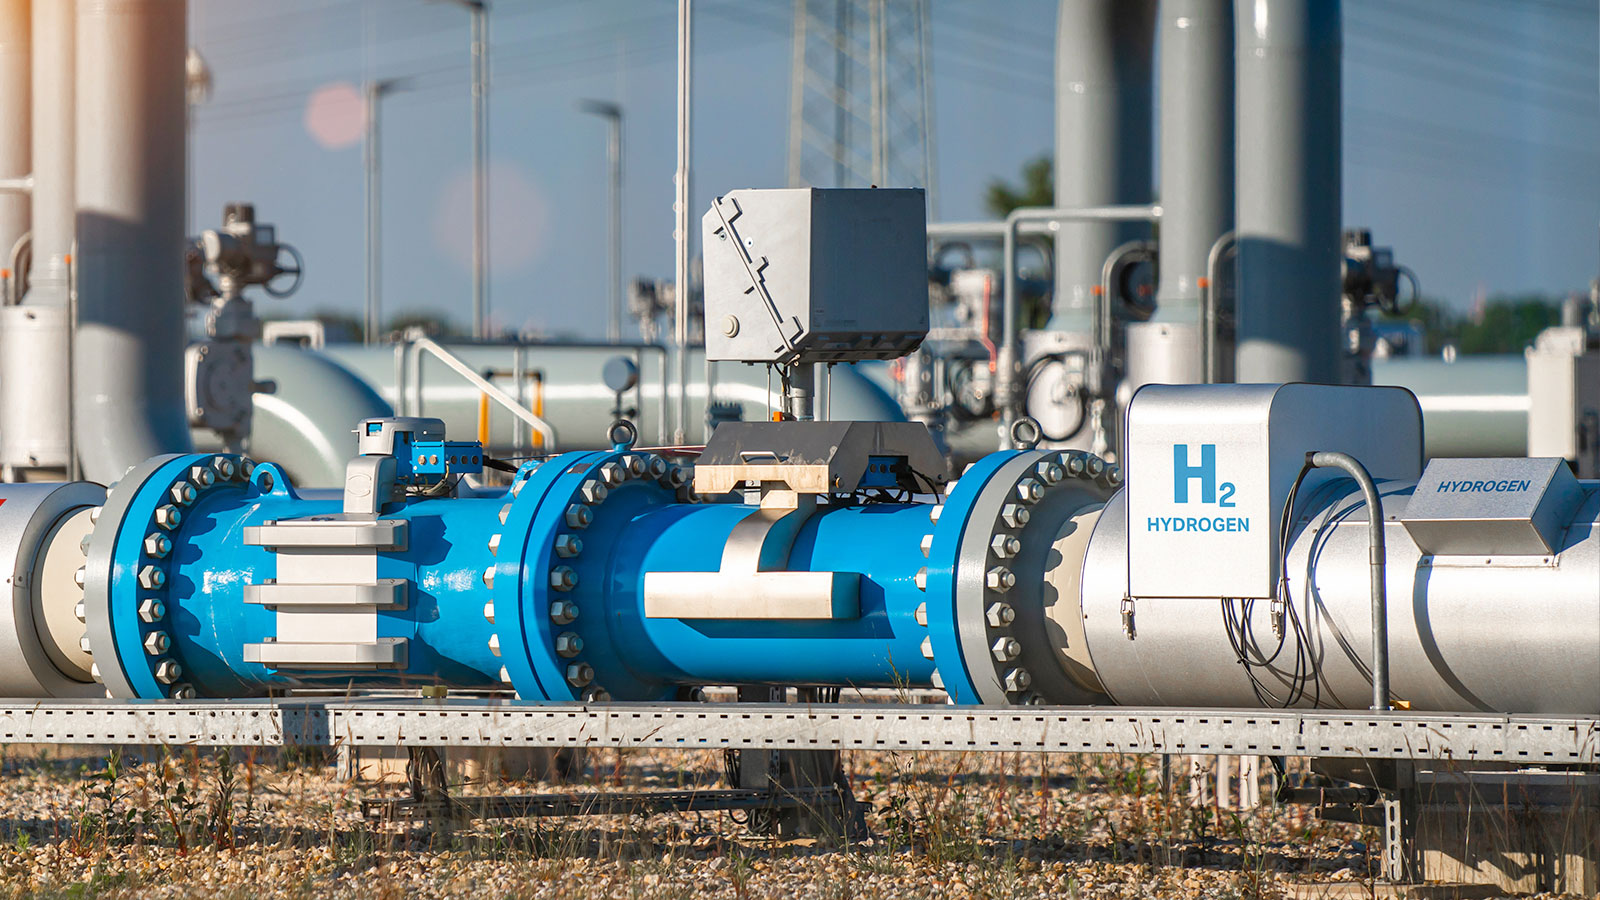 Data centres could produce and store hydrogen to reduce their carbon footprints.